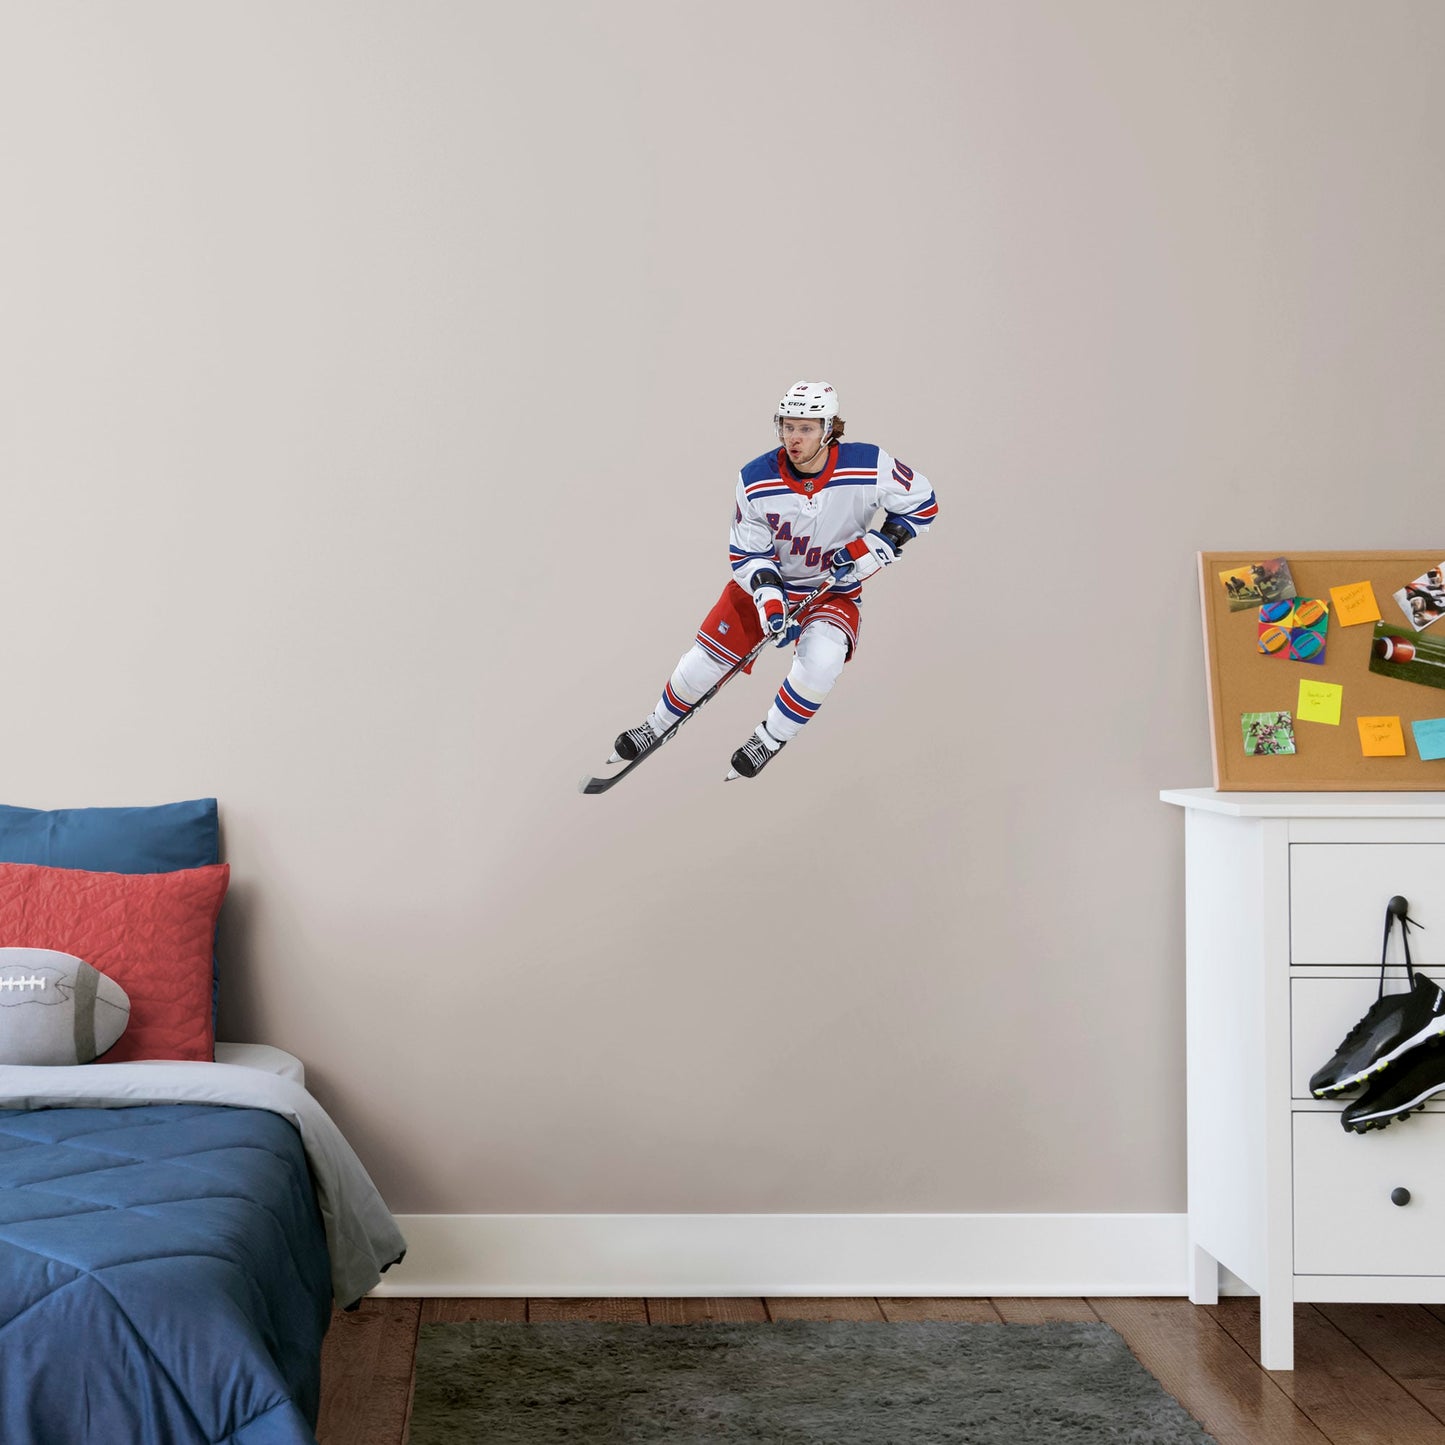 X-Large Athlete + 2 Decals (30"W x 35"H) The opposing goaltender had better be in position when Artemi Panarin takes the ice in this officially licensed NHL wall decal. The left wing for the New York Rangers has been making noise throughout the league since going undrafted and then becoming one of the NHL's top rookies a few years ago. This high-quality decal of the Breadman is the perfect addition to any Rangers fan's game room or bar, and can be easily removed in case it needs to be regifted.